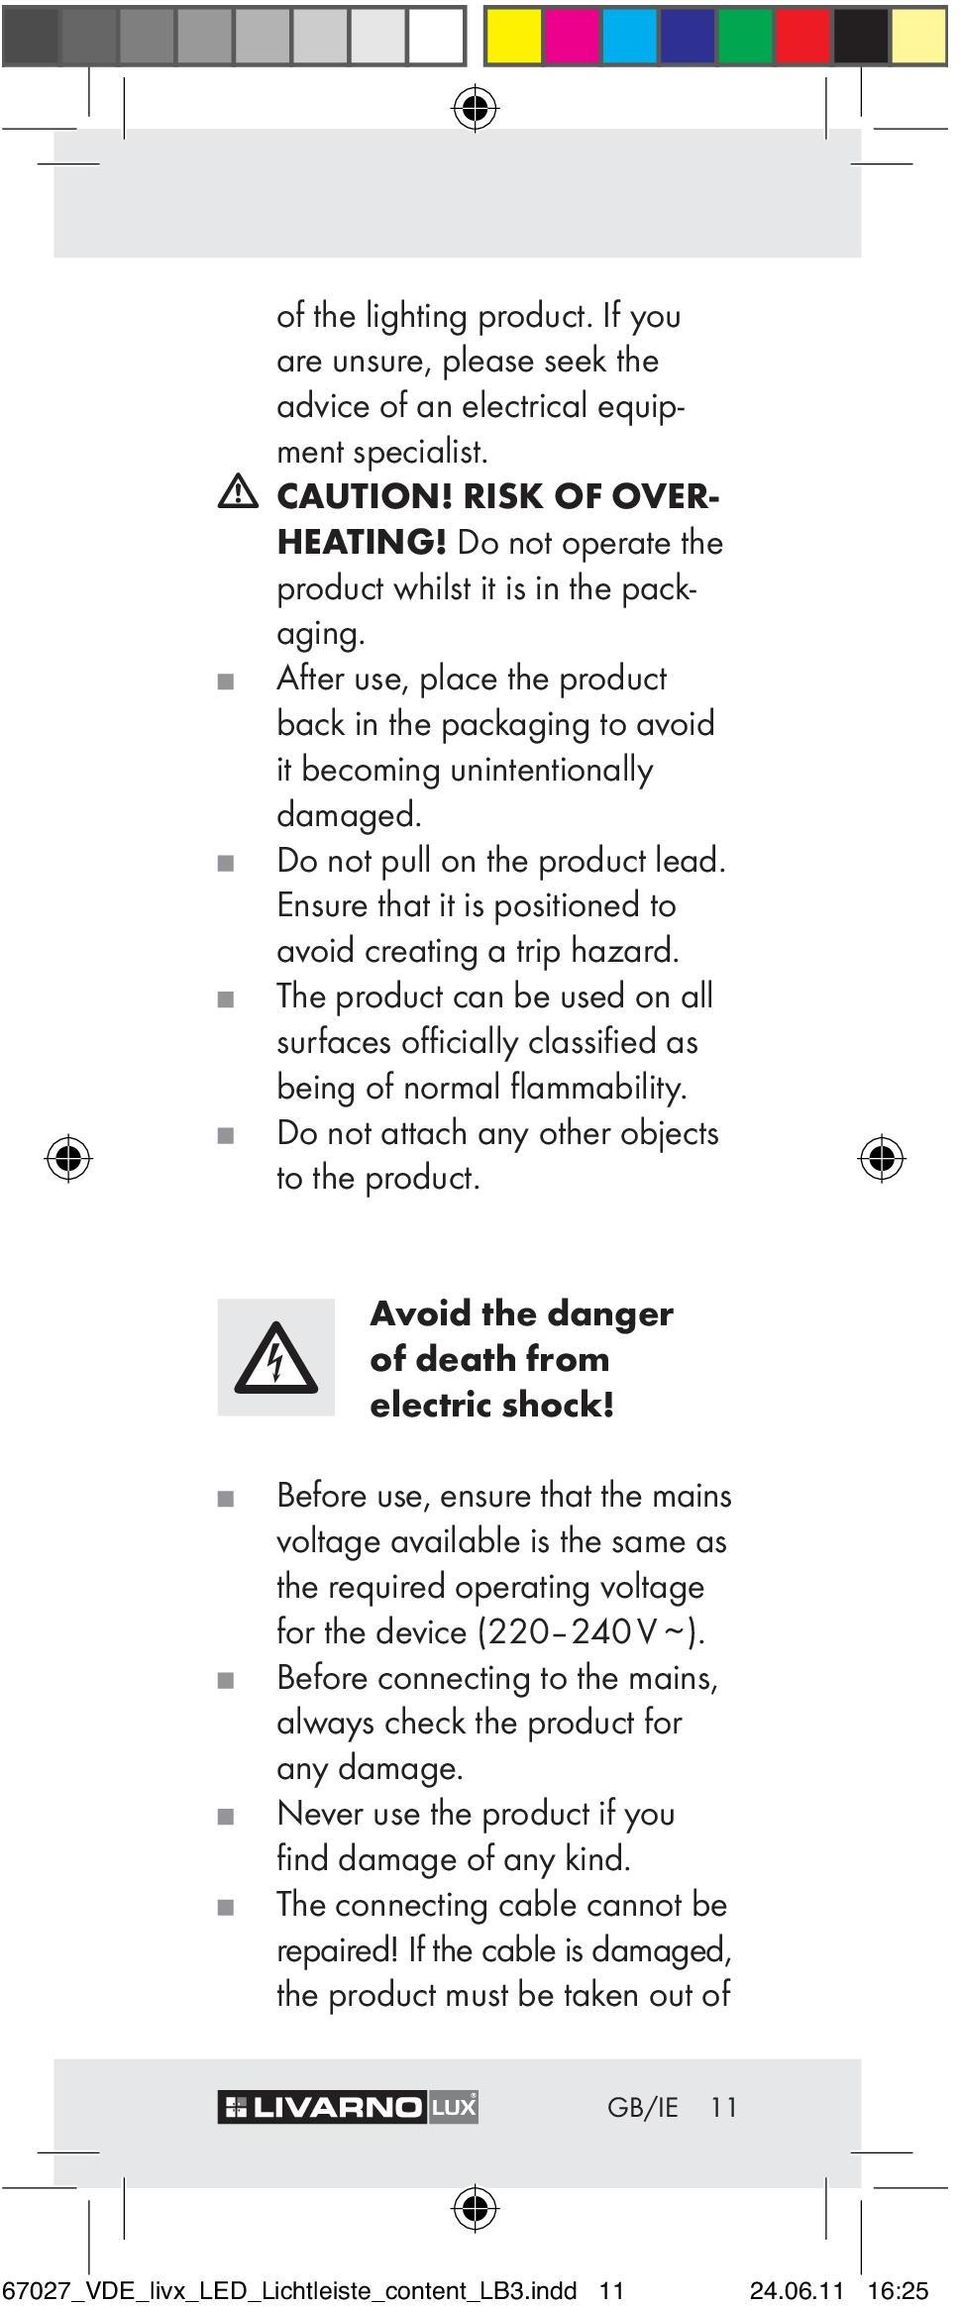 The product can be used on all surfaces officially classified as being of normal flammability. Do not attach any other objects to the product. Avoid the danger of death from electric shock!